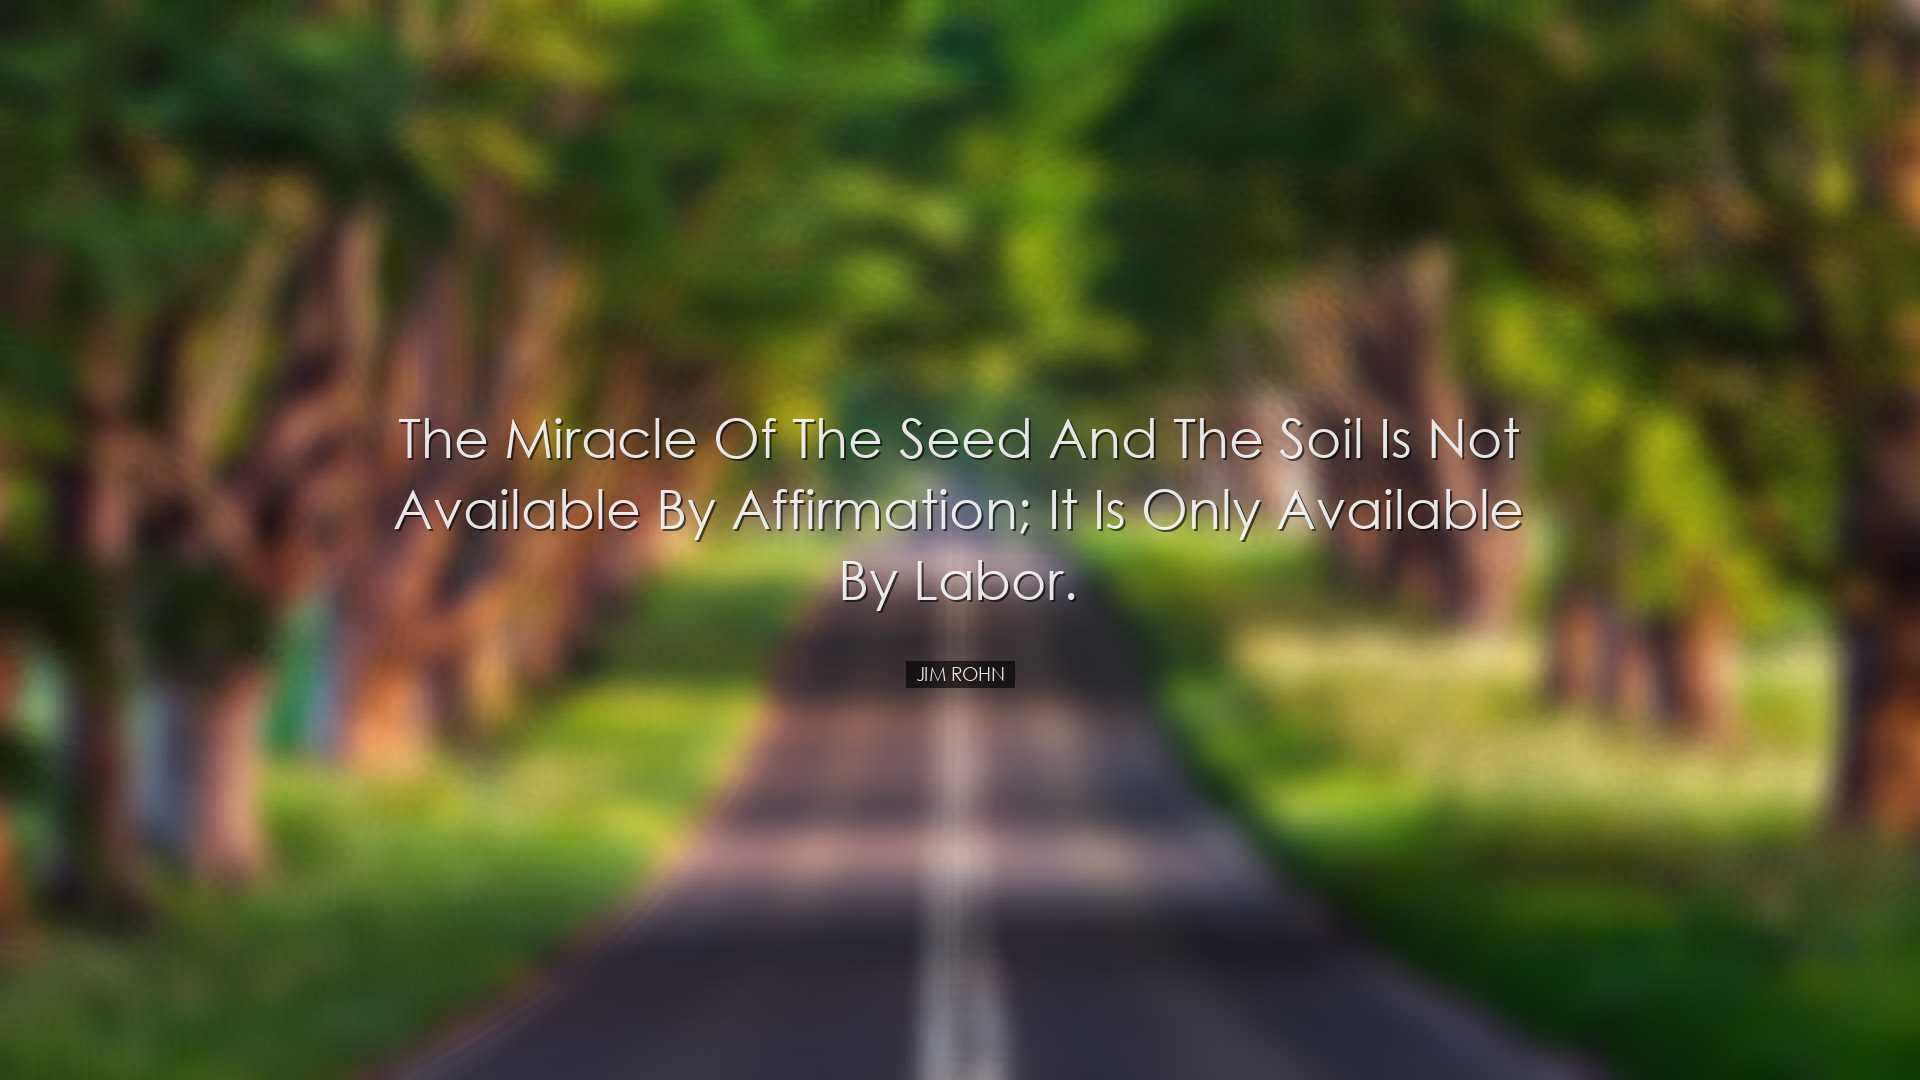 The miracle of the seed and the soil is not available by affirmati